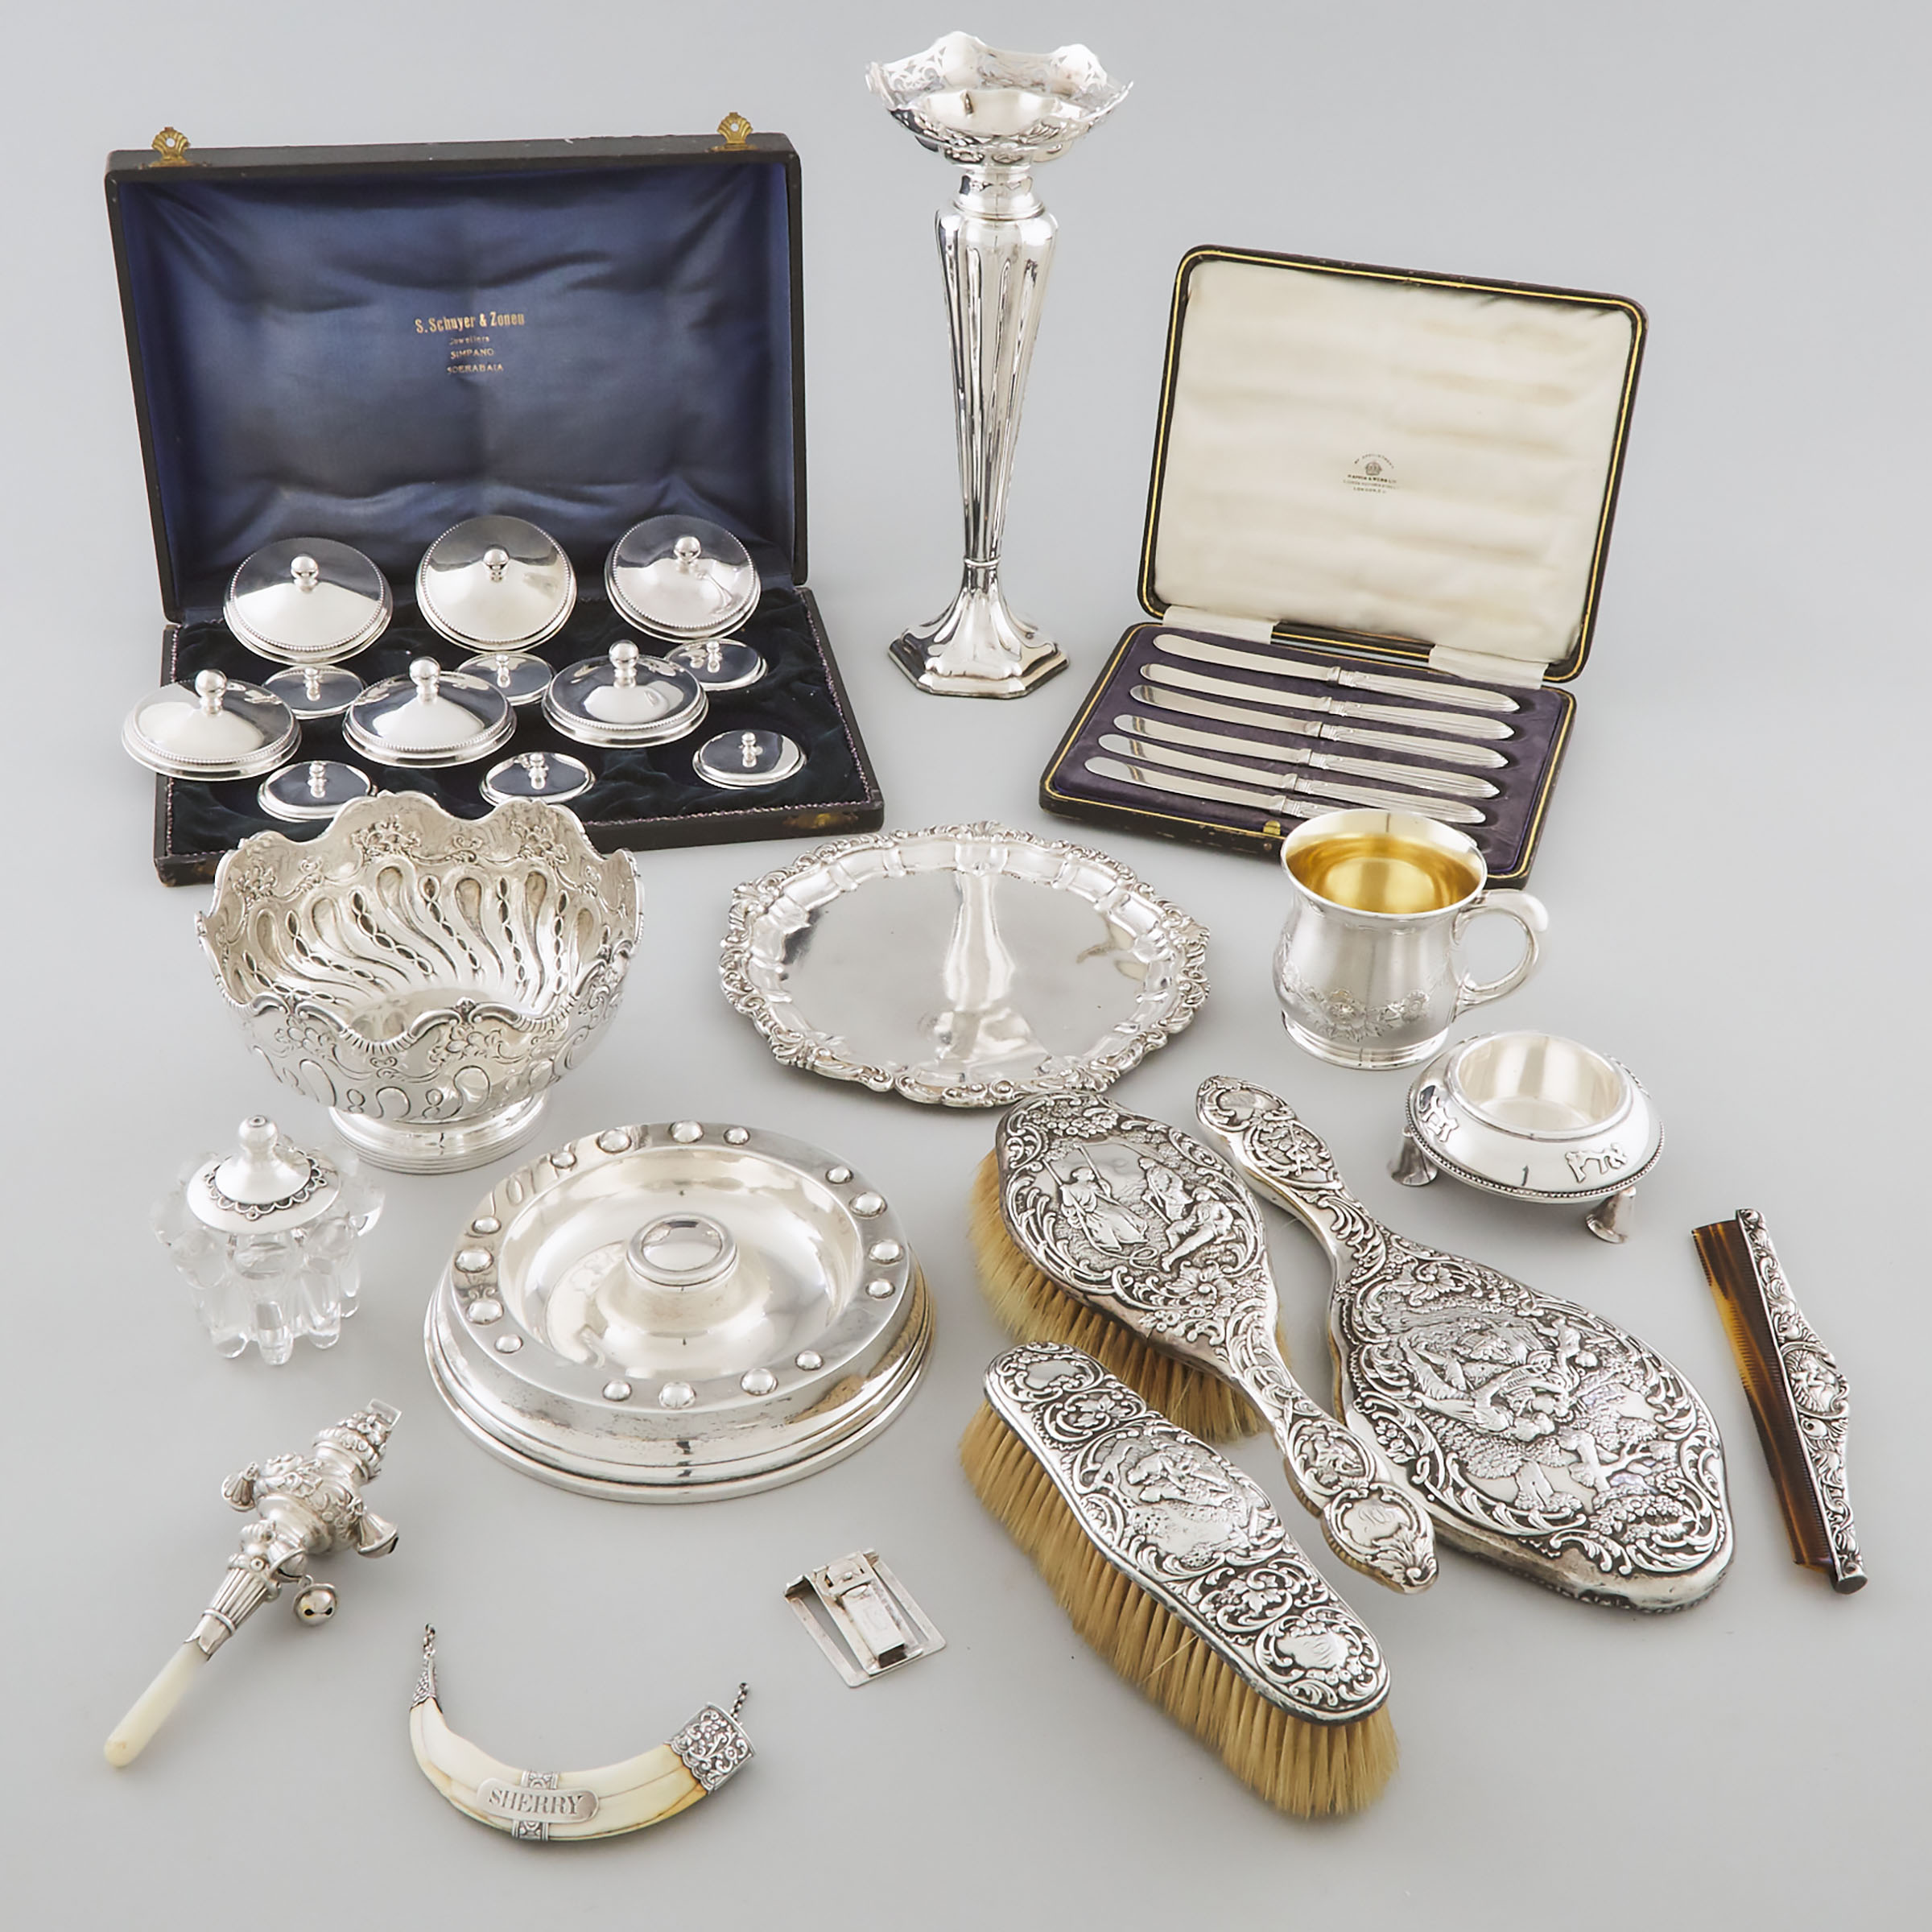 Group of English, Continental, Eastern and North American Silver, 19th/20th century